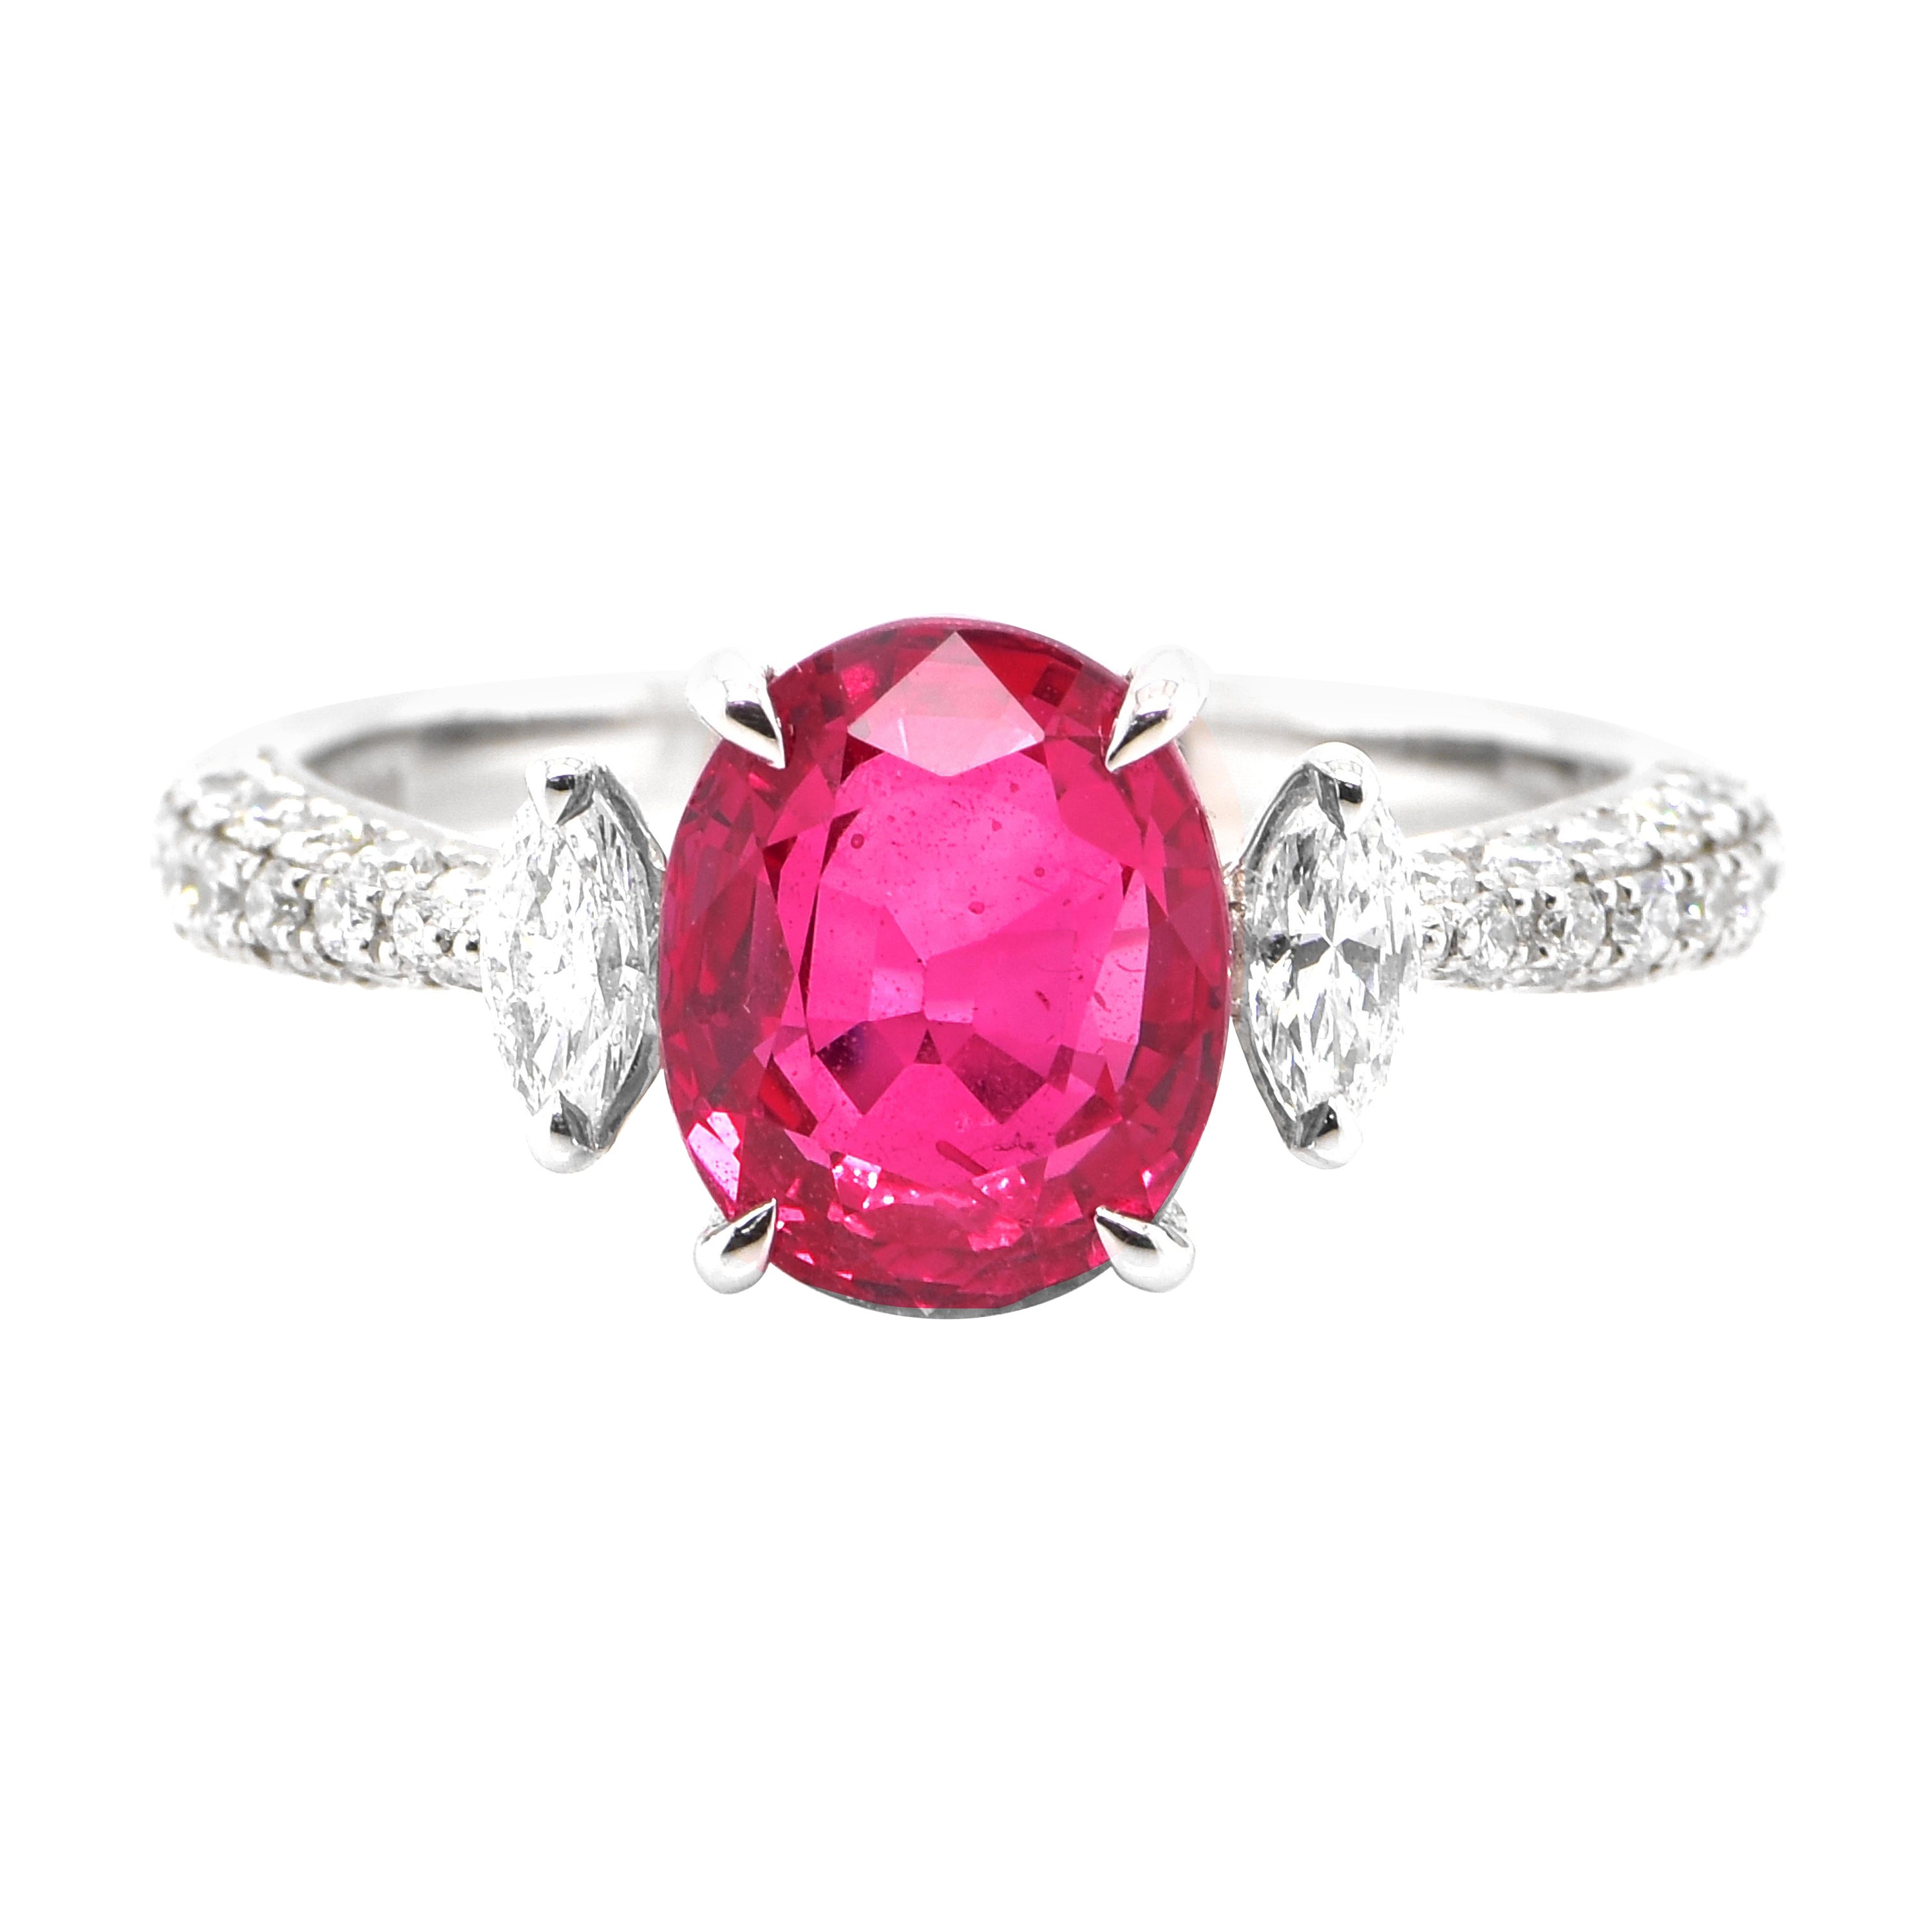 GIA Certified 3.17 Carat Siam Ruby and Diamond Cocktail Ring Made in Platinum For Sale